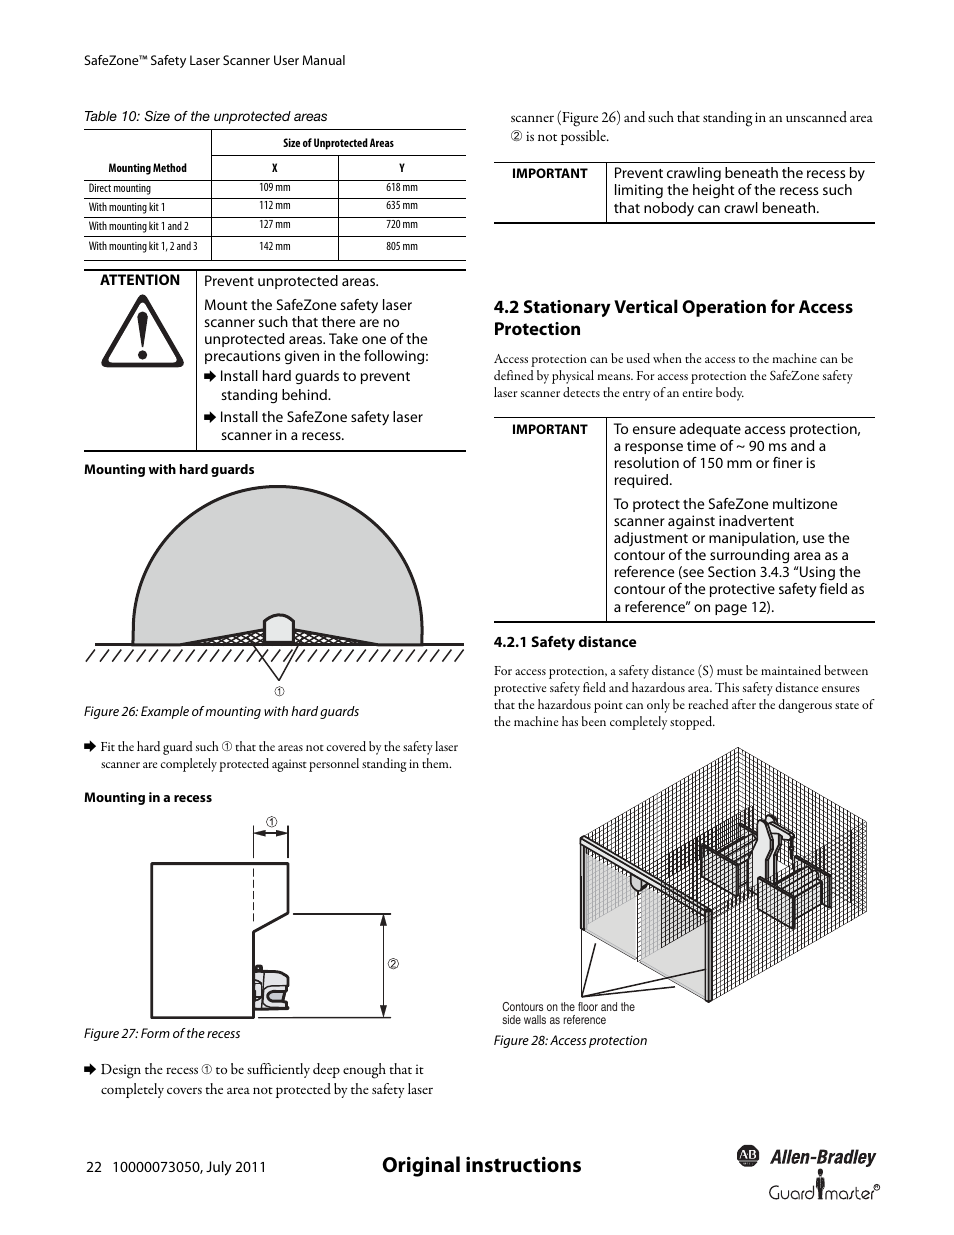 Original instructions | Rockwell Automation 442L SafeZone Singlezone & Multizone Safety Laser Scanner User Manual | Page 24 / 60